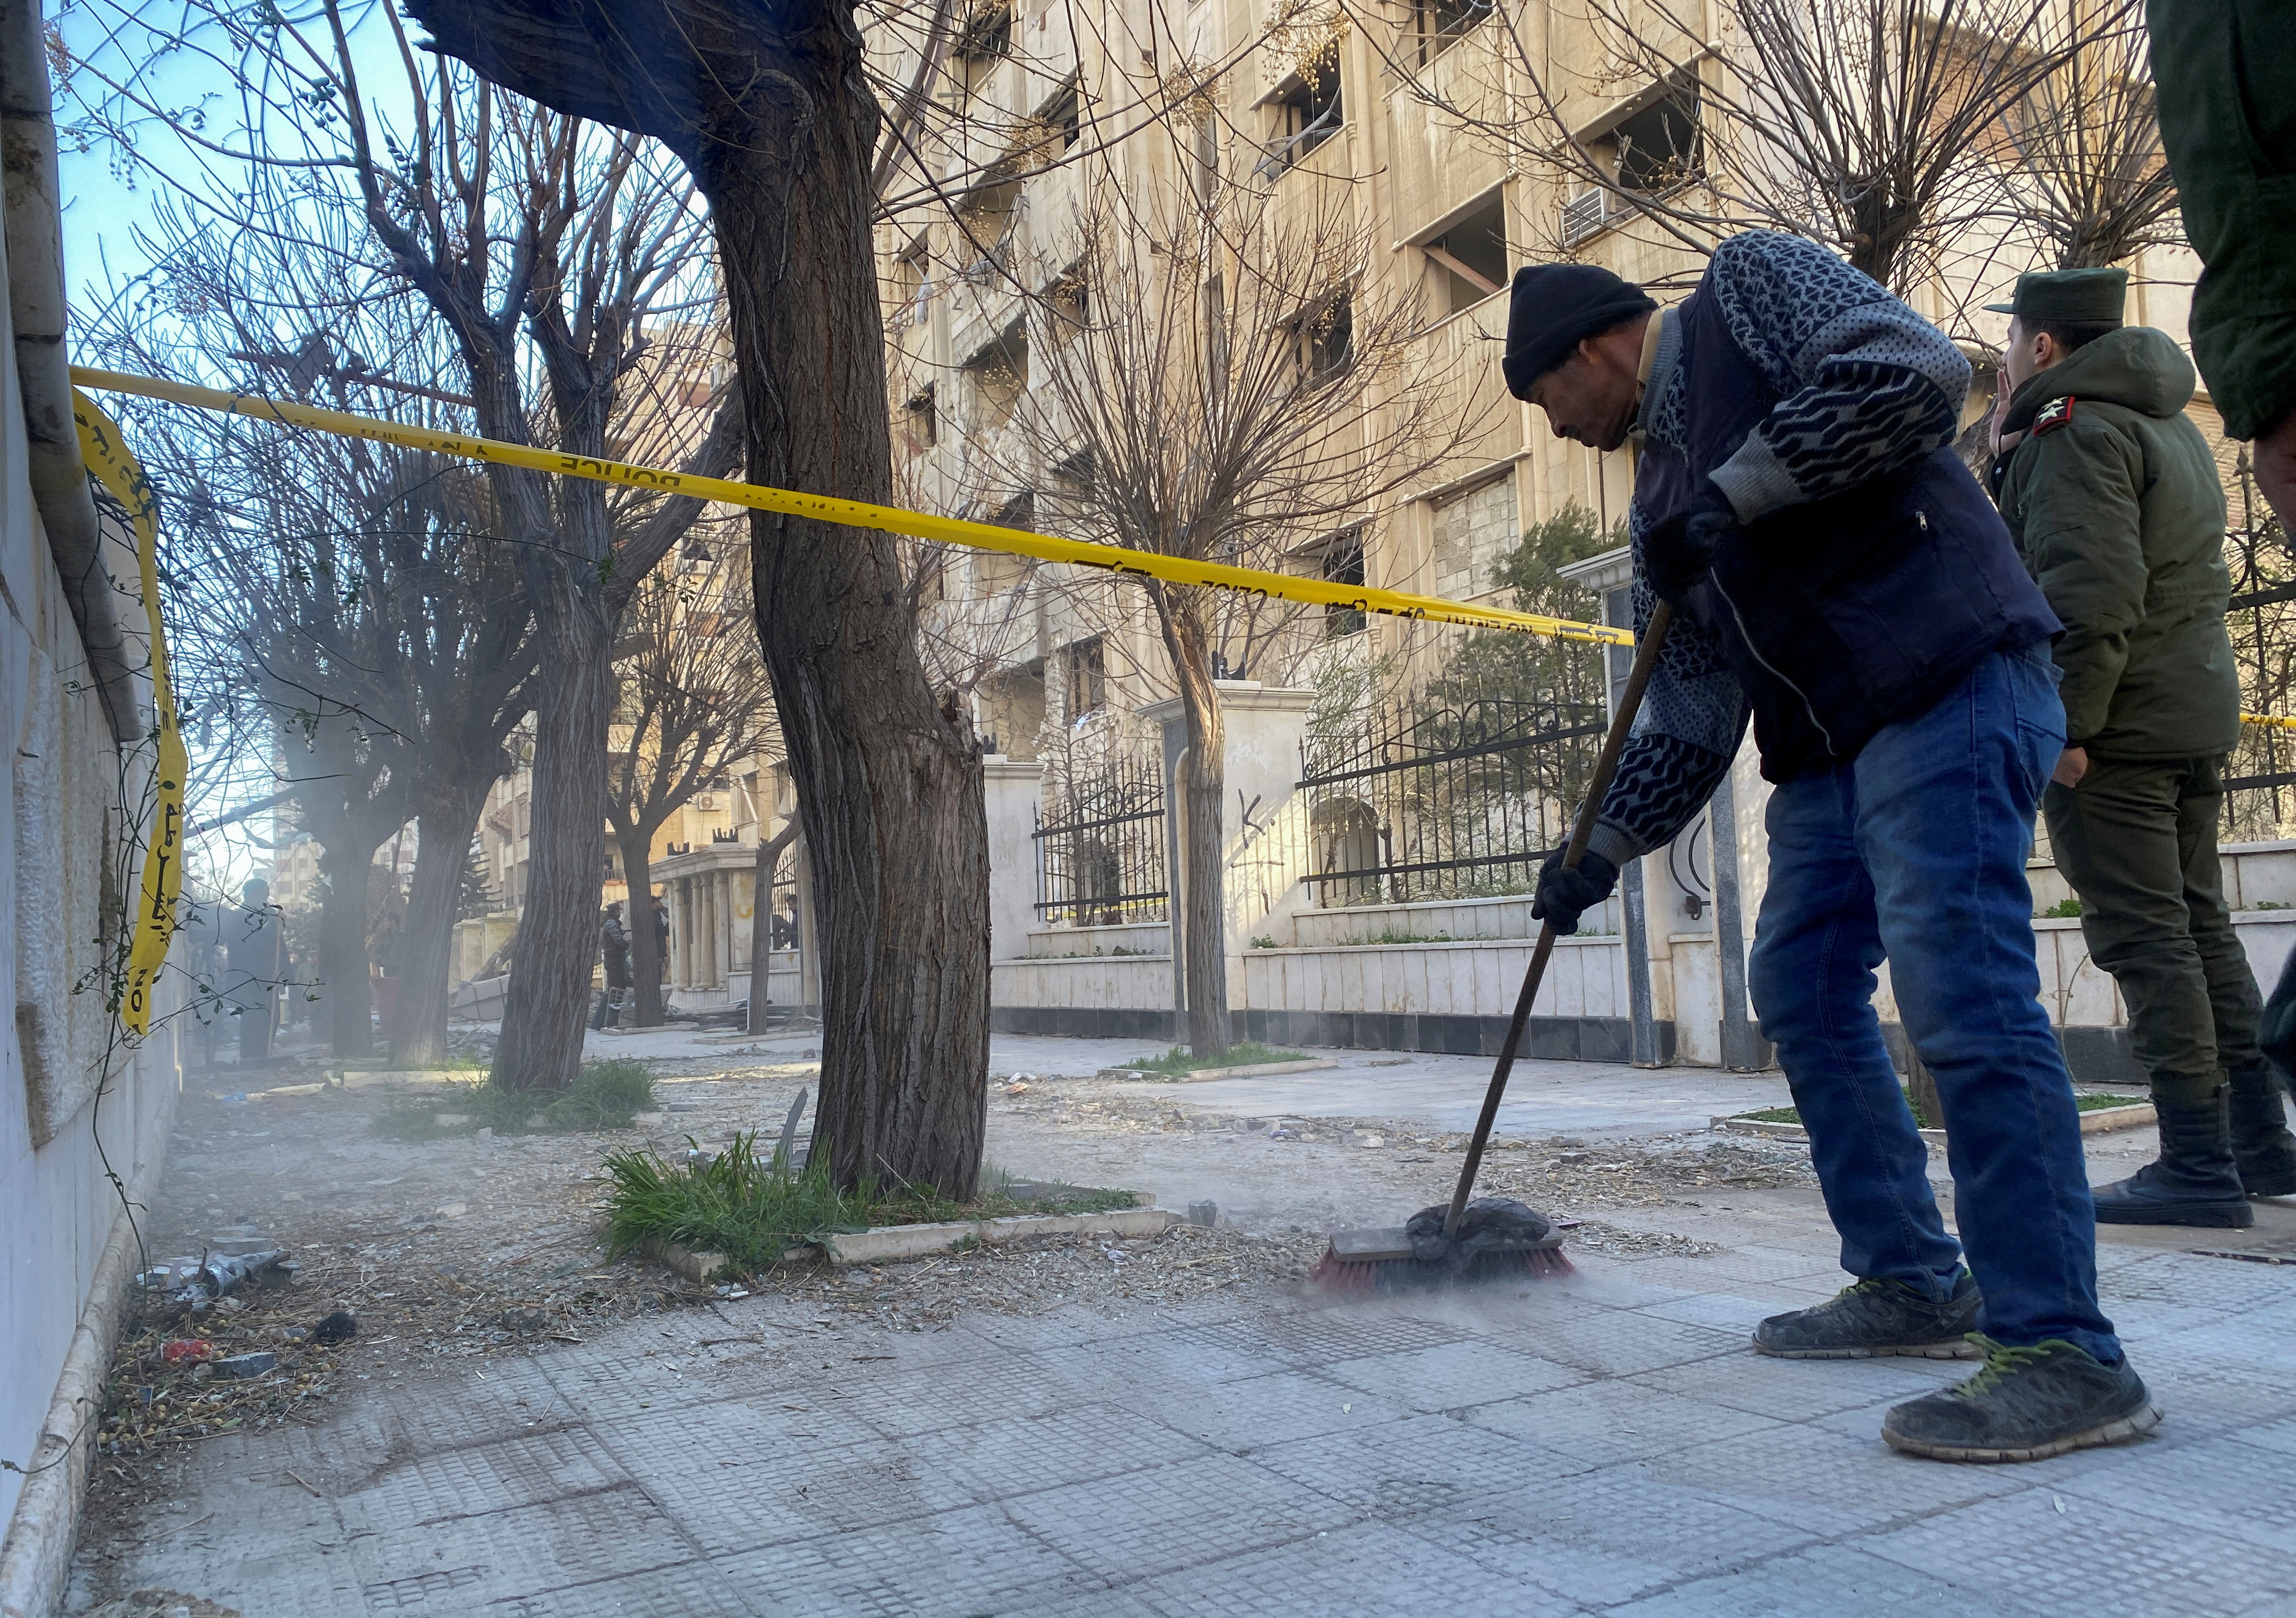 A man sweeps the street near the site of a rocket attack, in central Damascus' Kafr Sousa neighborhood